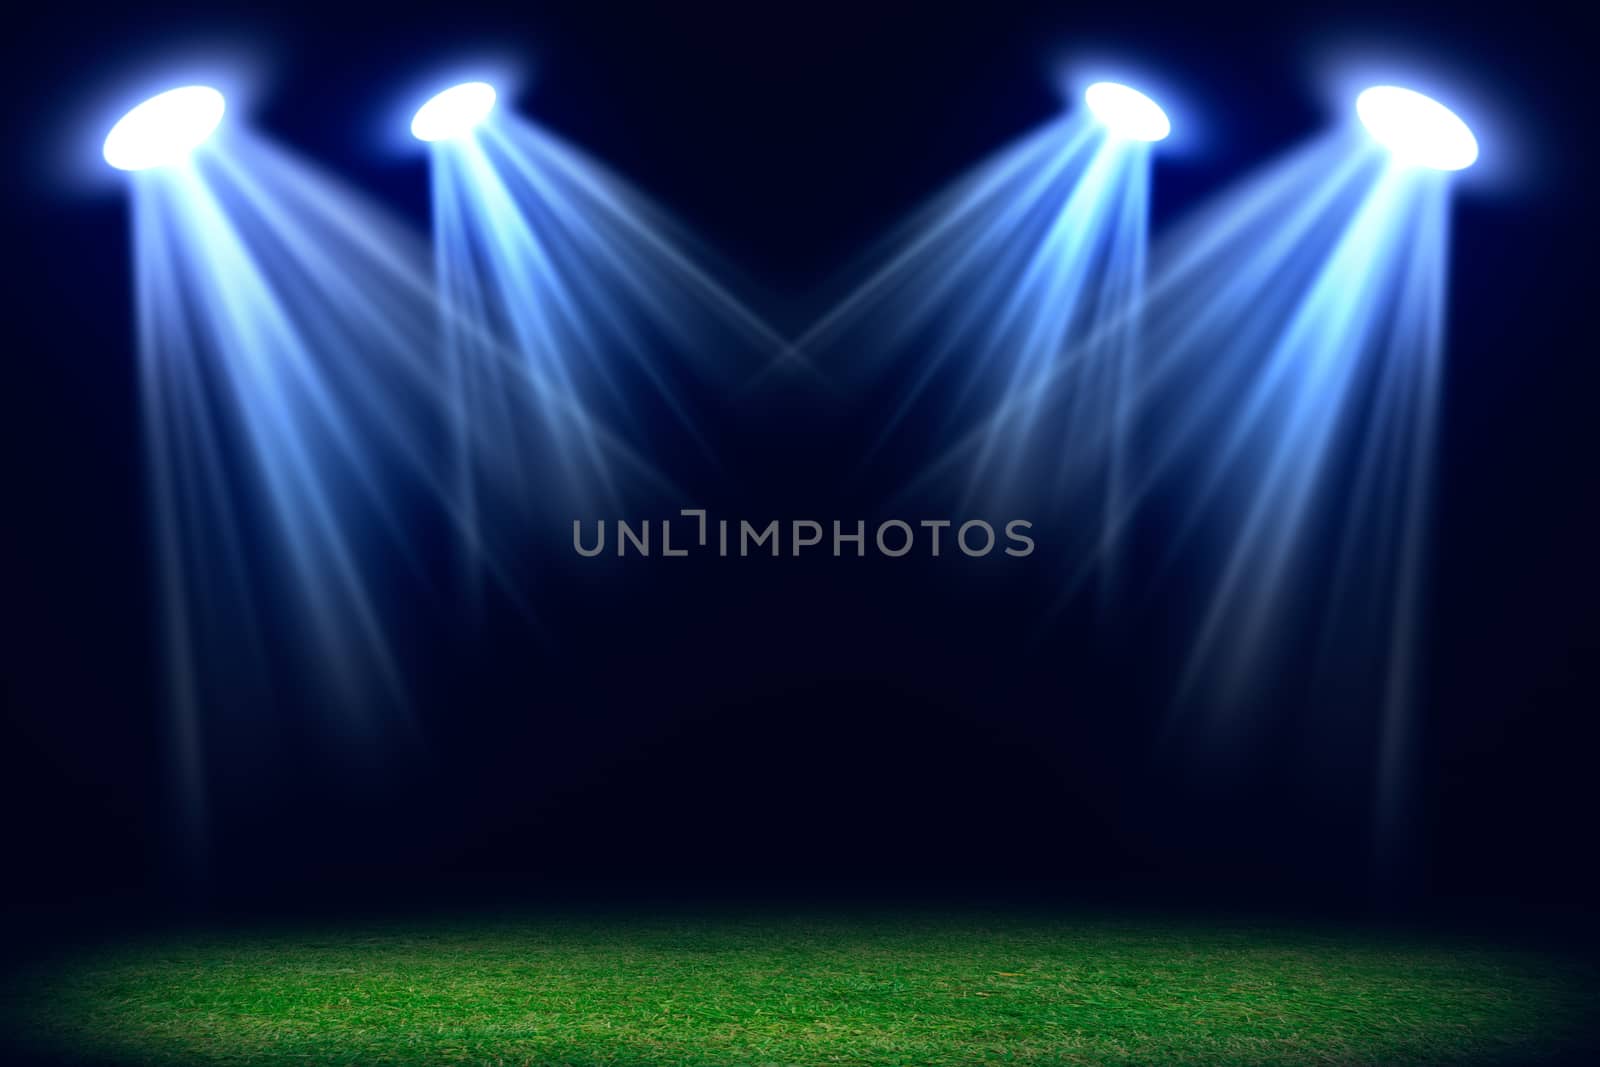 Grass field lit with bright spotlights. Abstract background for your product